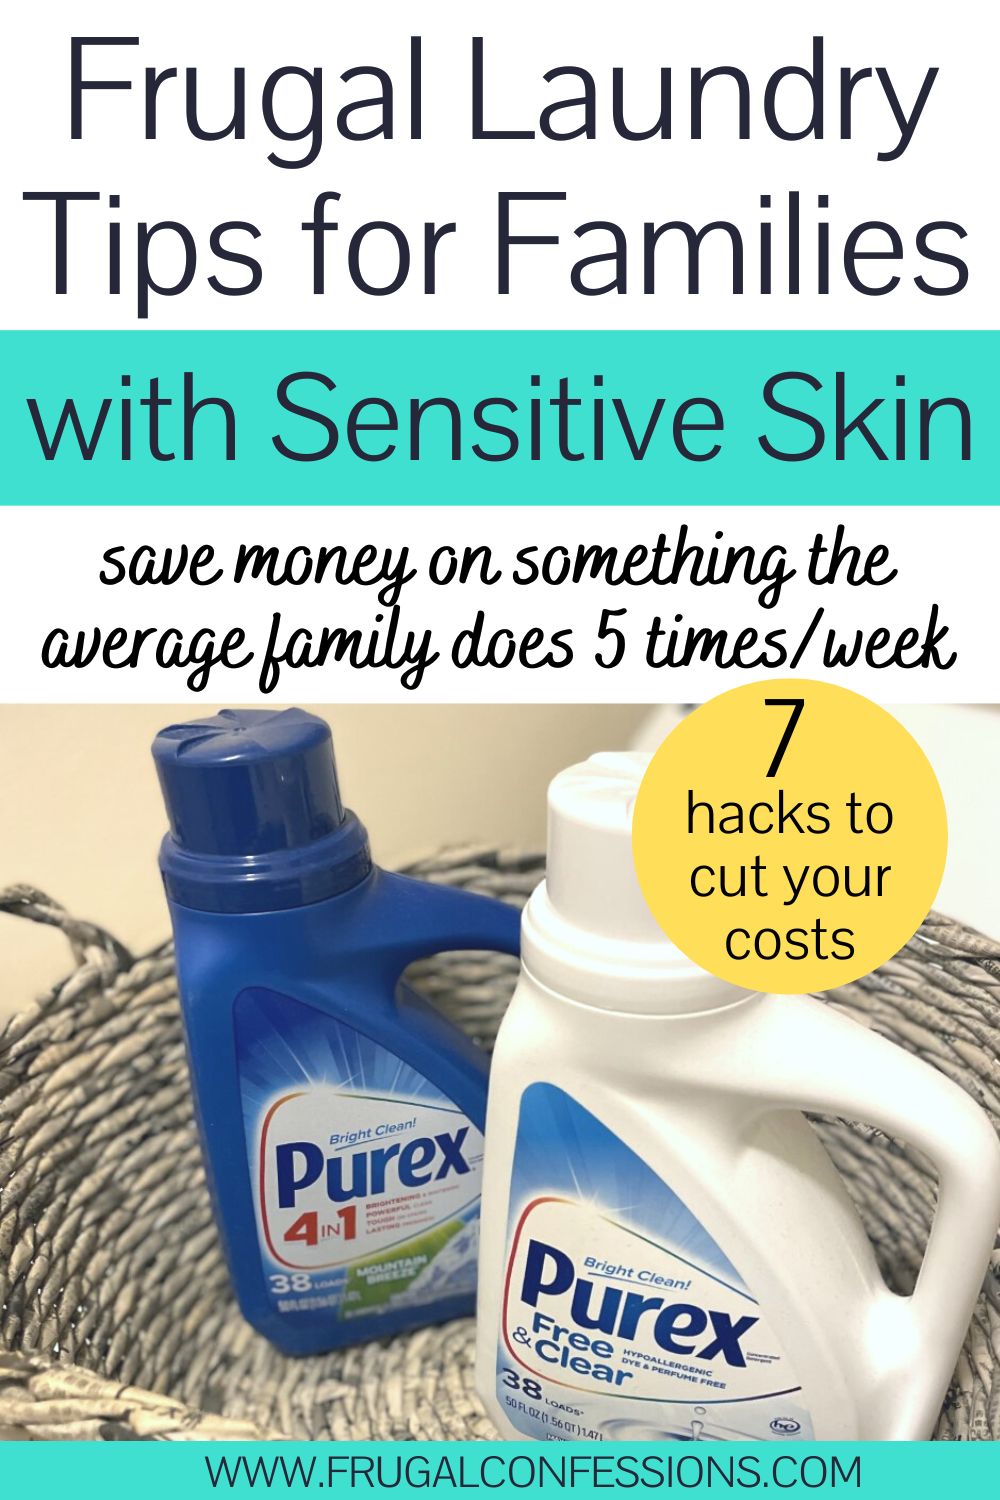 basket of Purex detergents on top of a white washing machine, text overlay "frugal laundry tips for families with sensitive skin"